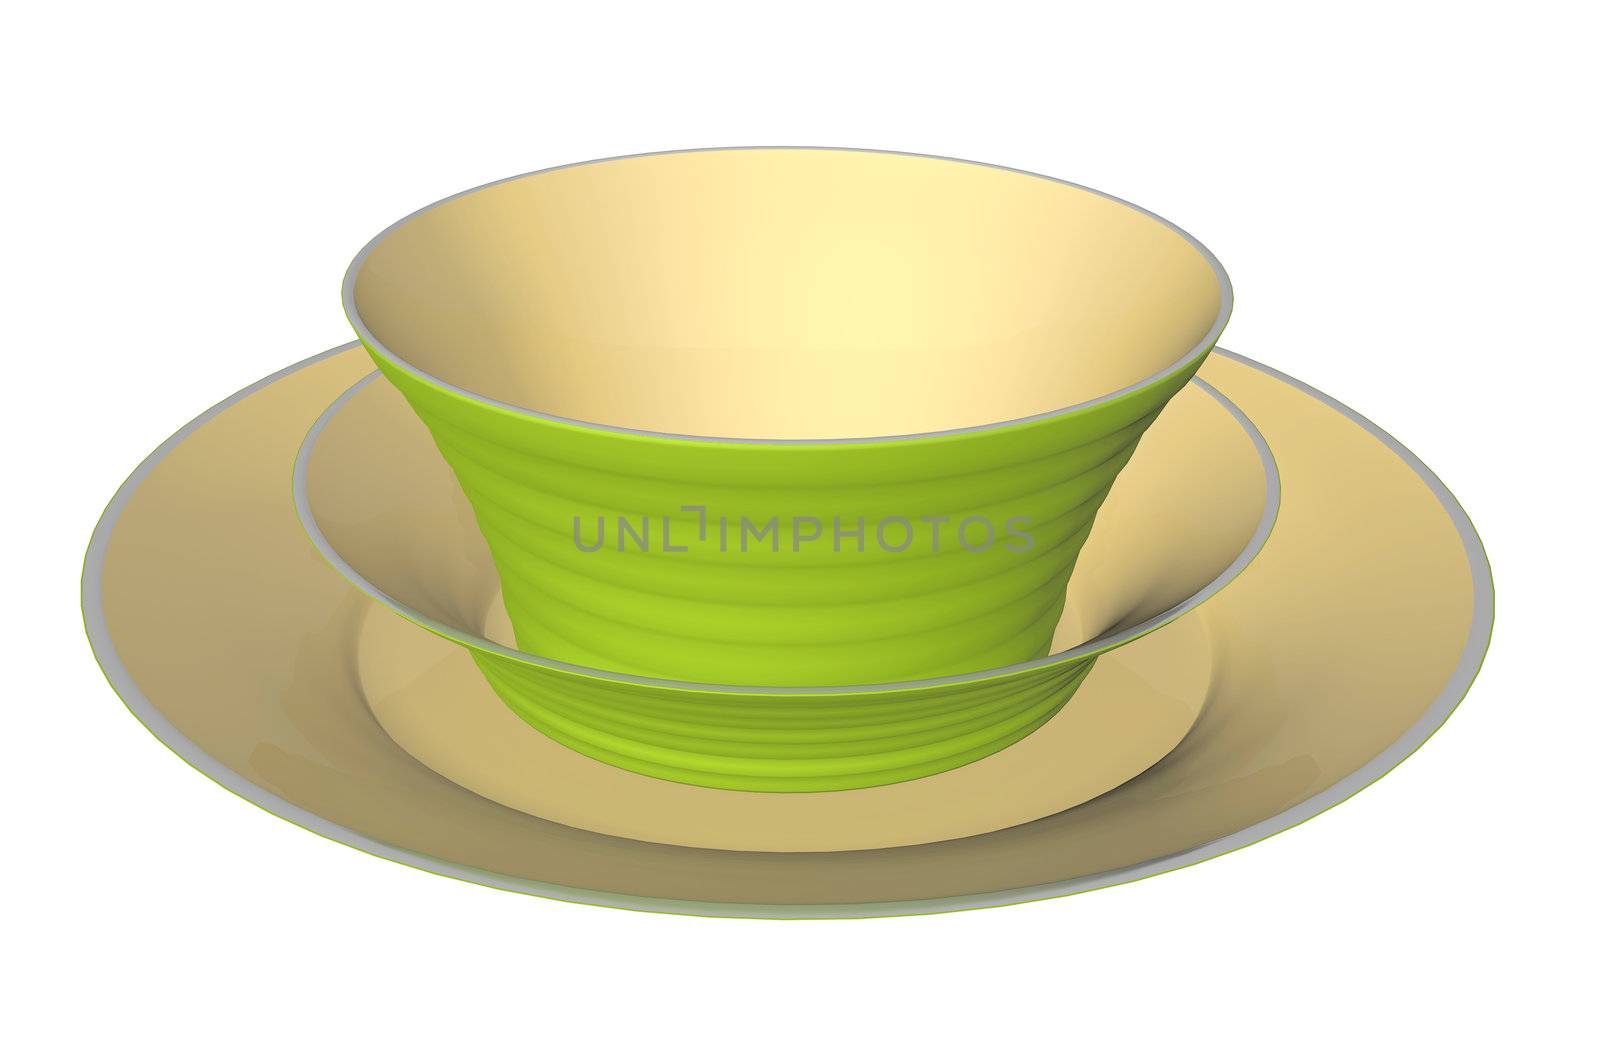 Green and beige ceramic dinner plate and bowls, 3D illustration, isolated against a white background